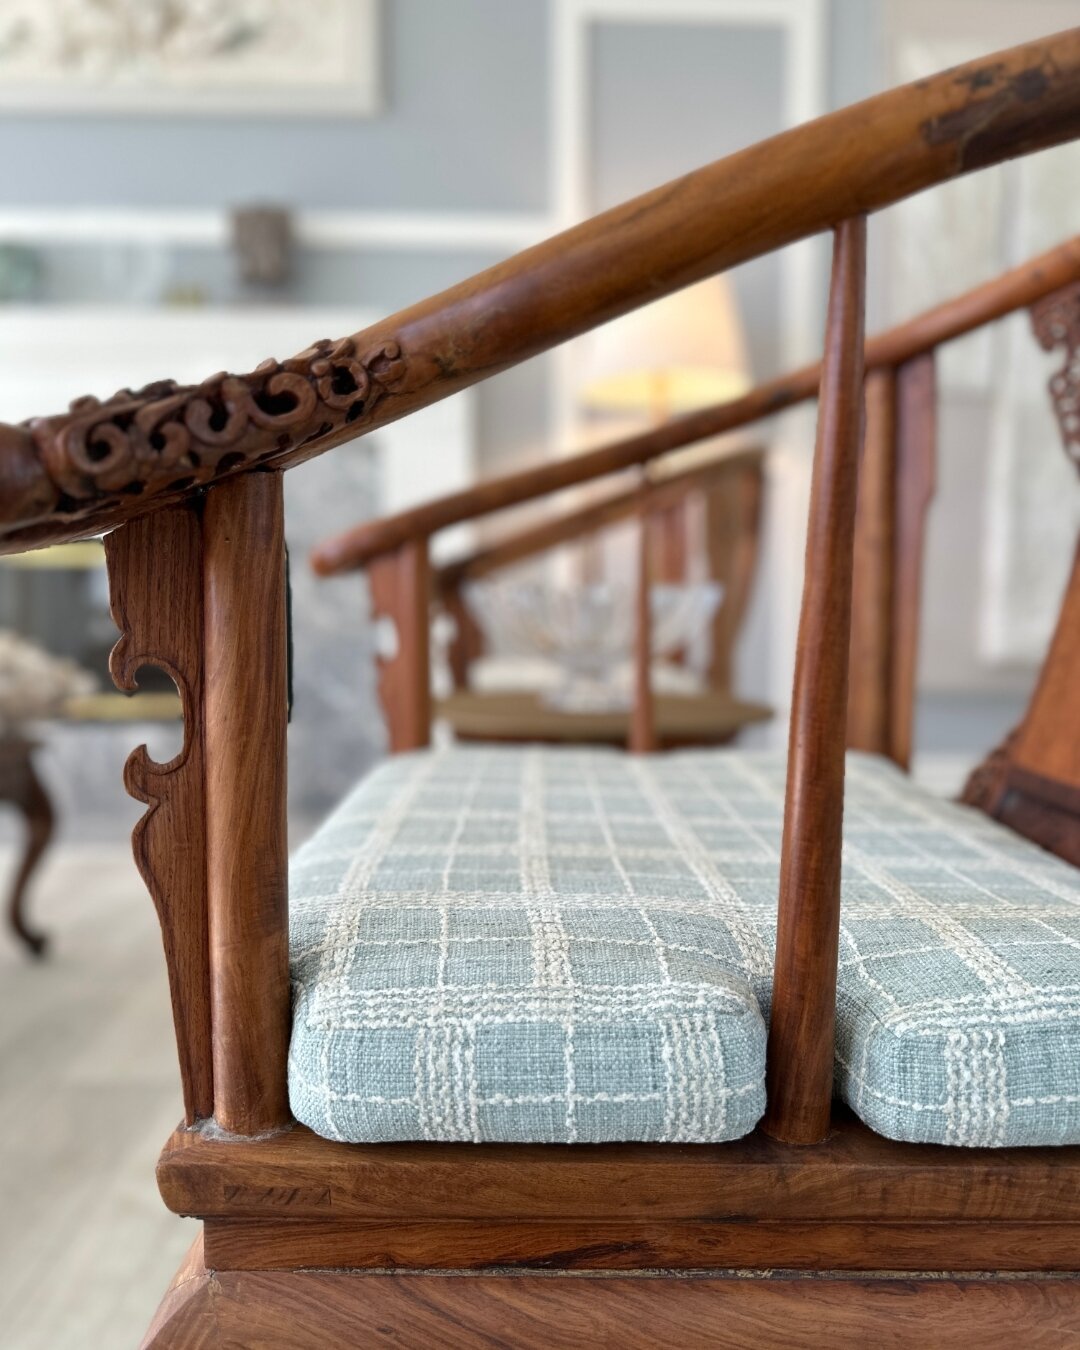 Ah, the details!  I love how the cushions turned out on these antique chairs.  The fabric softens the look and (and the seat) of these hand carved beauties!

#jcrenovators #homedecor #homeremodel #decorating #ocdesigner